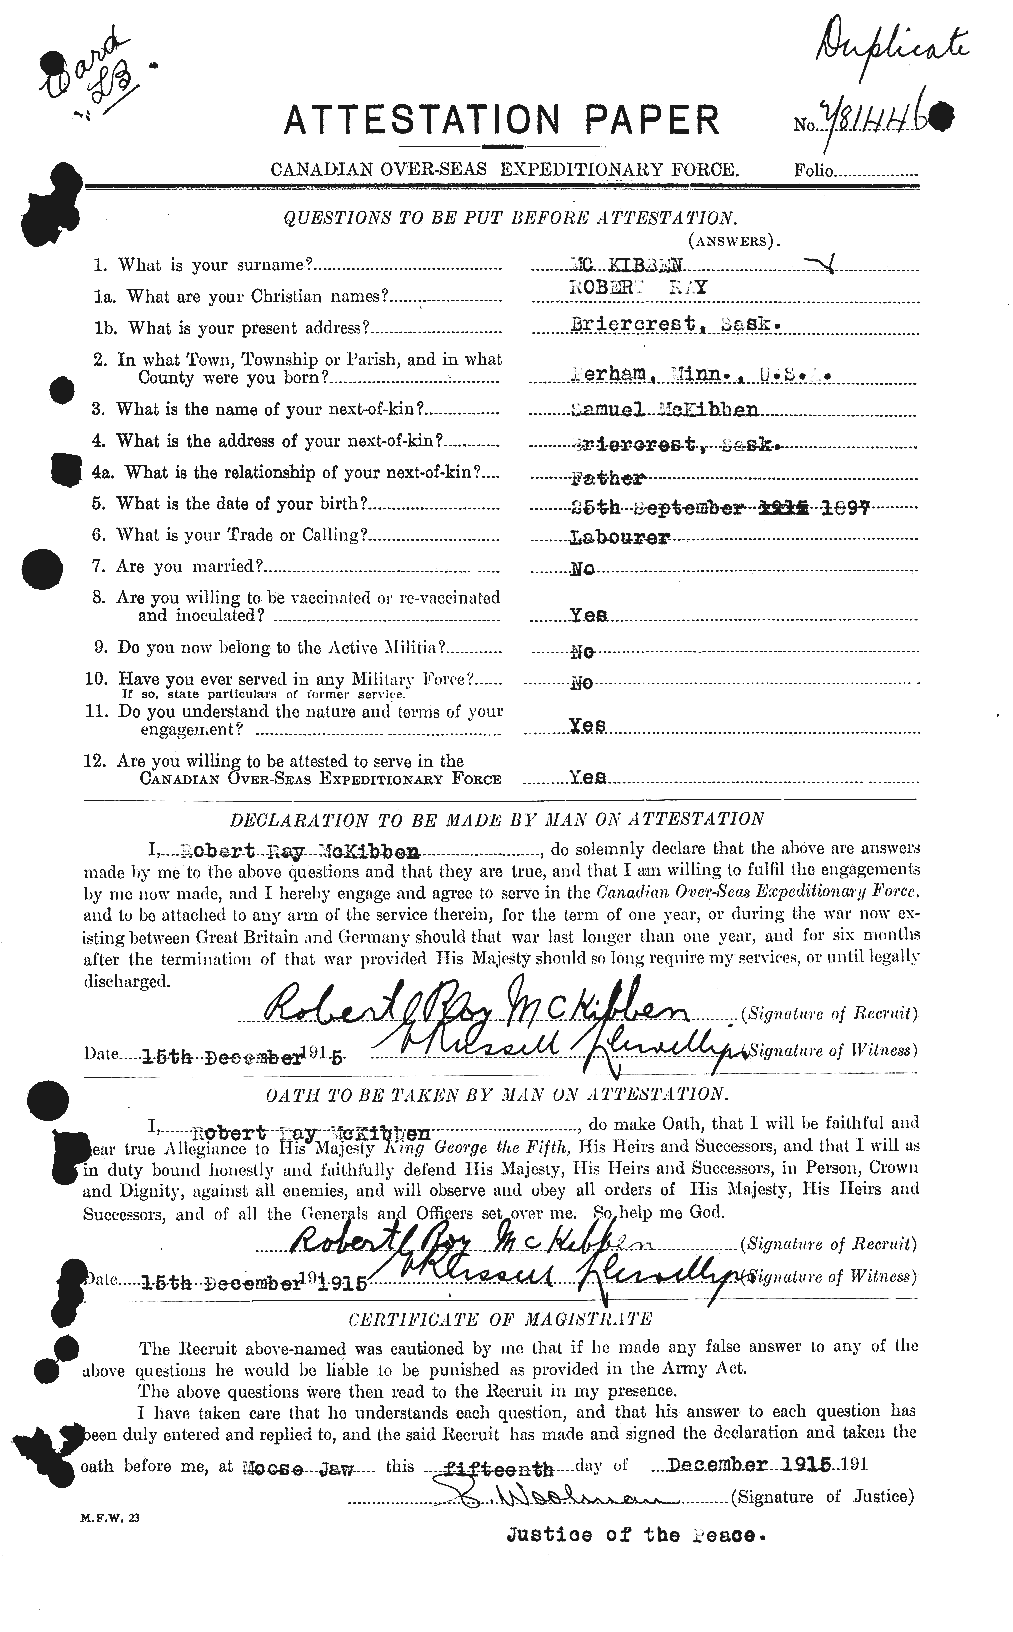 Personnel Records of the First World War - CEF 533688a